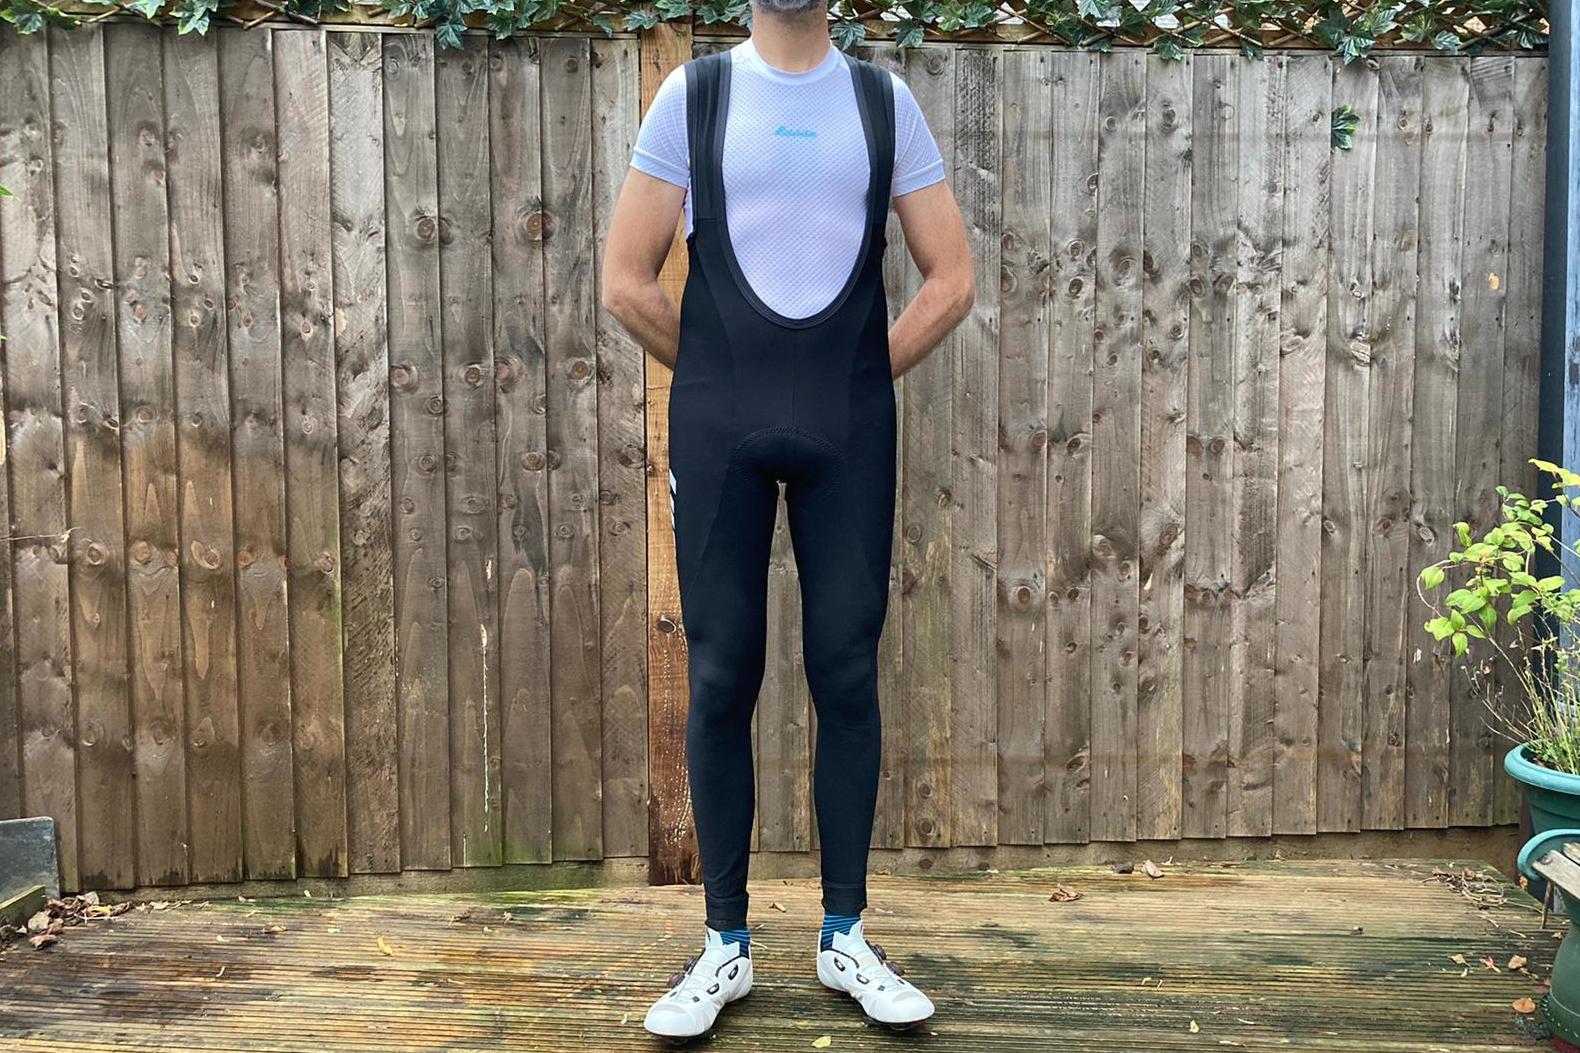 Lusso Classic Thermal Bib Tights review